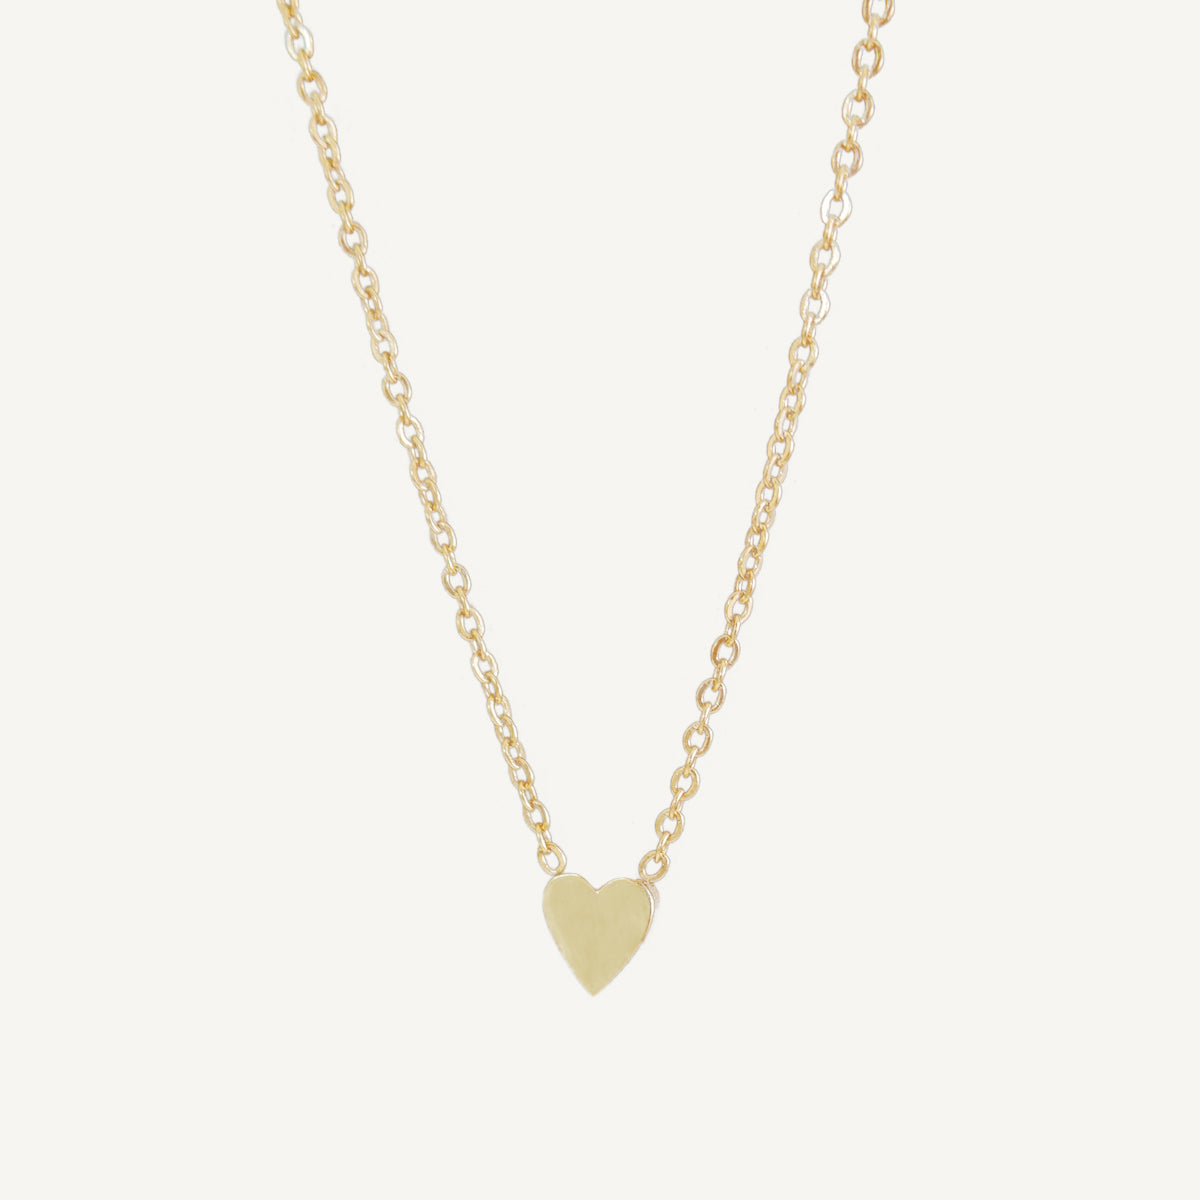 The Flat Heart Necklace